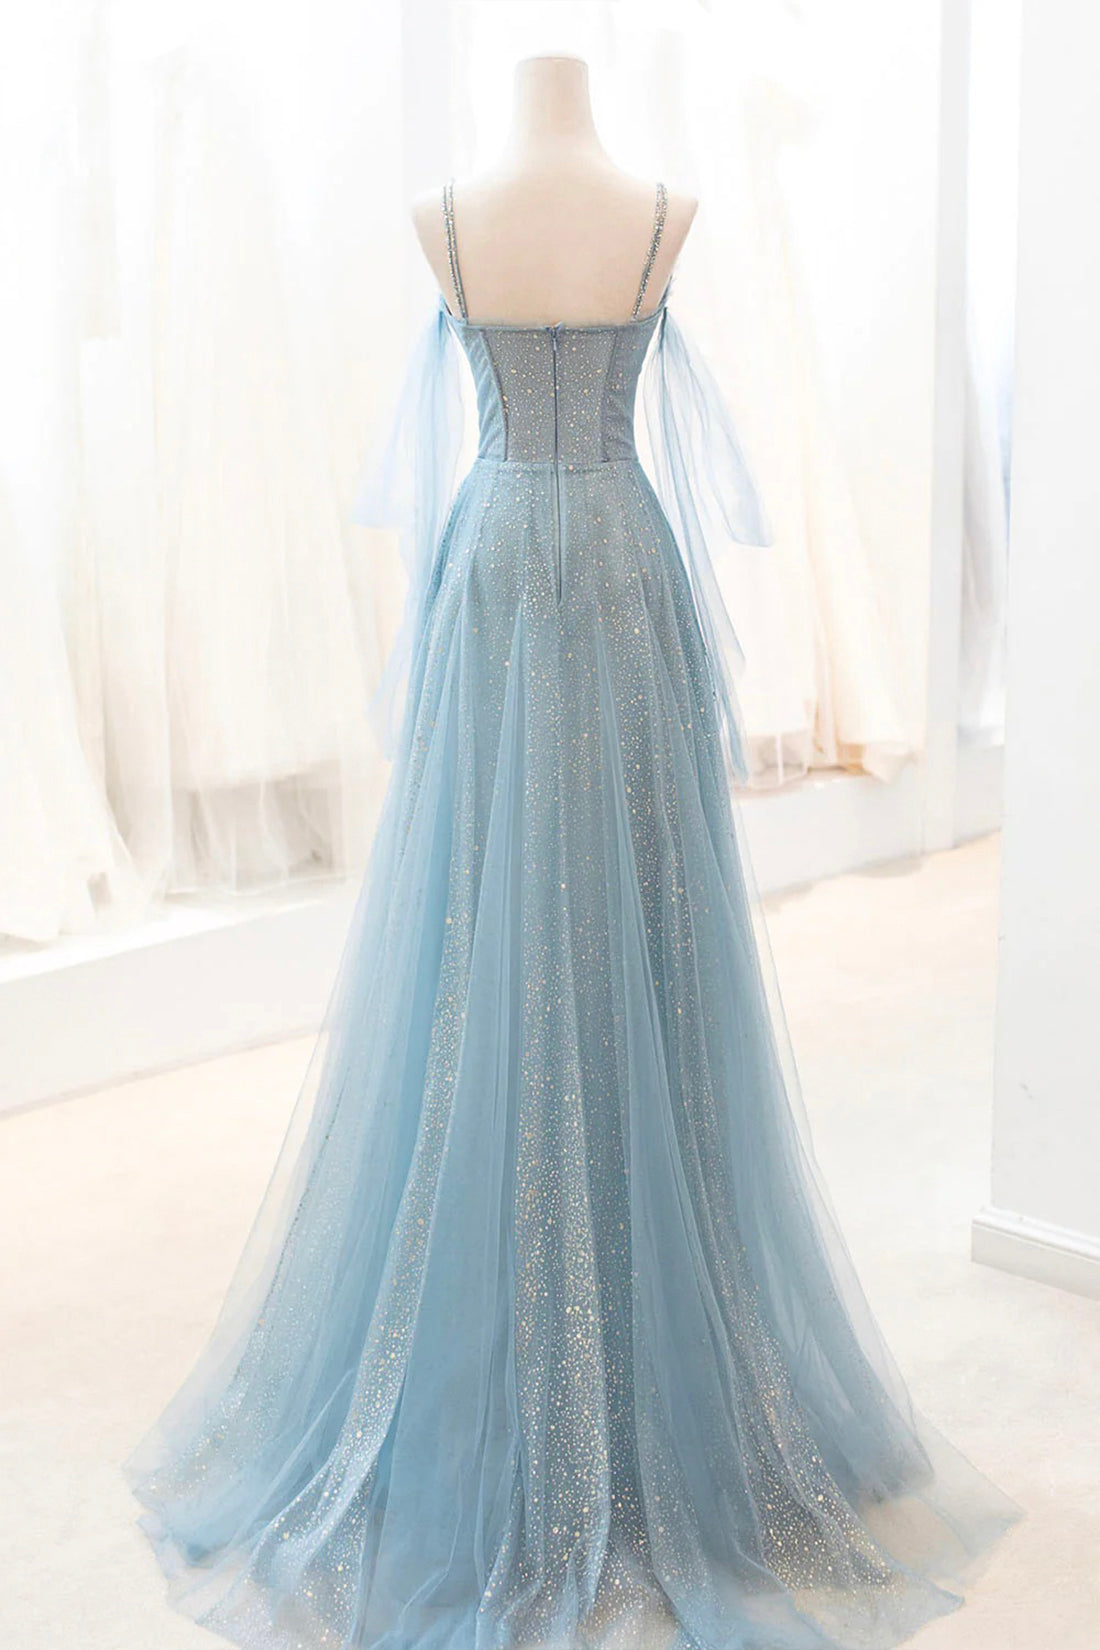 Dusty Blue Sparkly Tulle Long Prom Dress, A-Line Spaghetti Strap Evening Dress